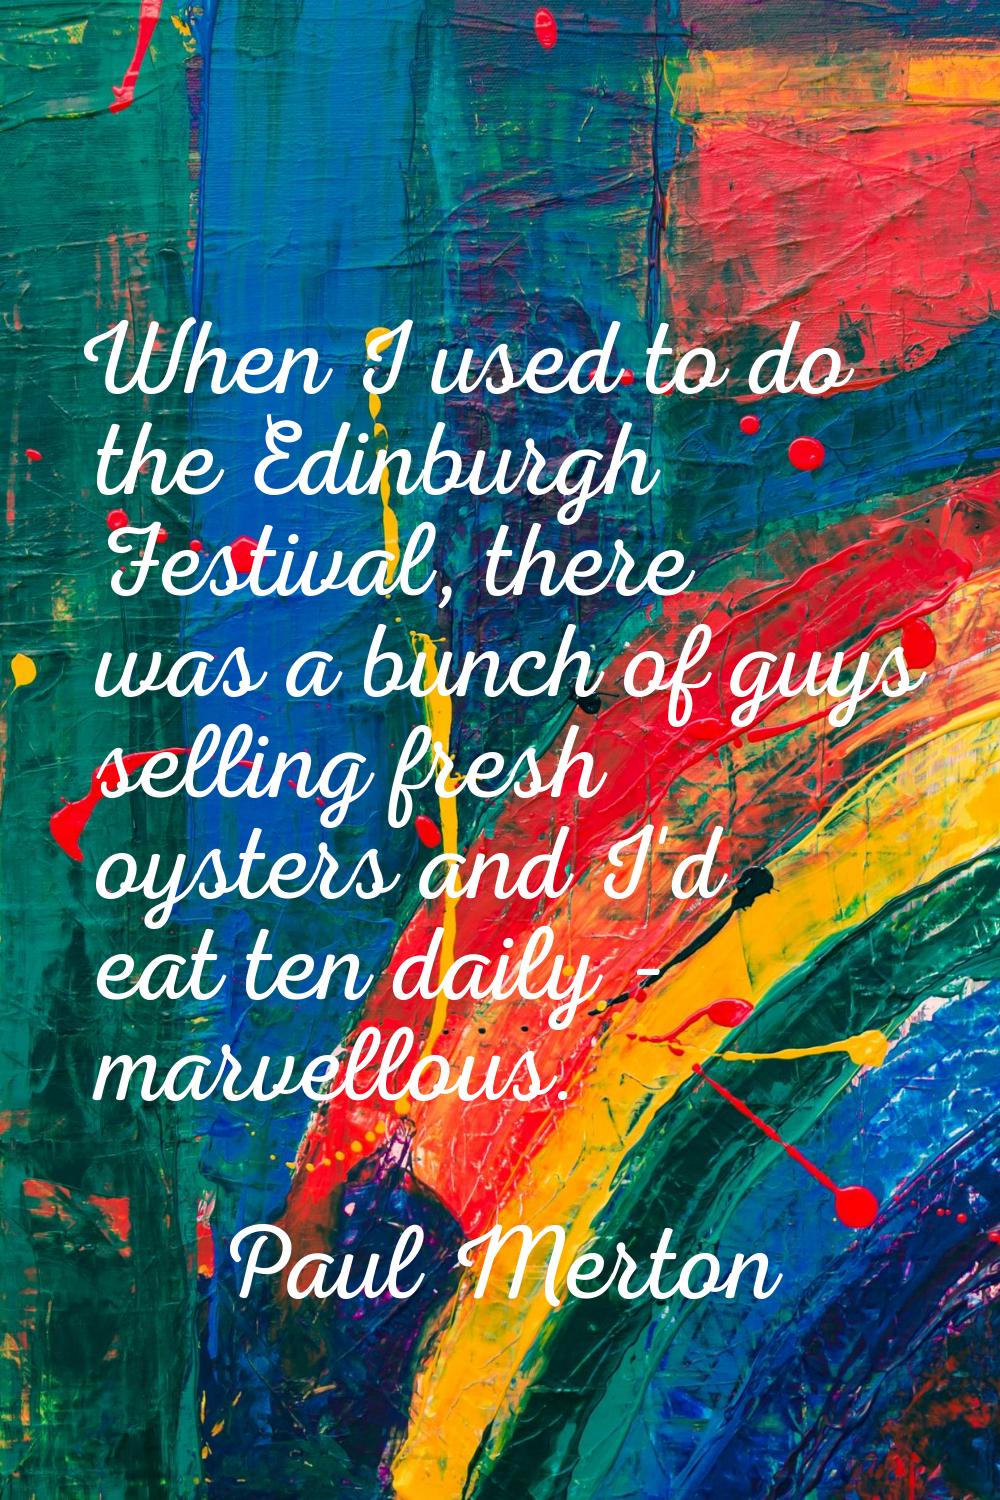 When I used to do the Edinburgh Festival, there was a bunch of guys selling fresh oysters and I'd e